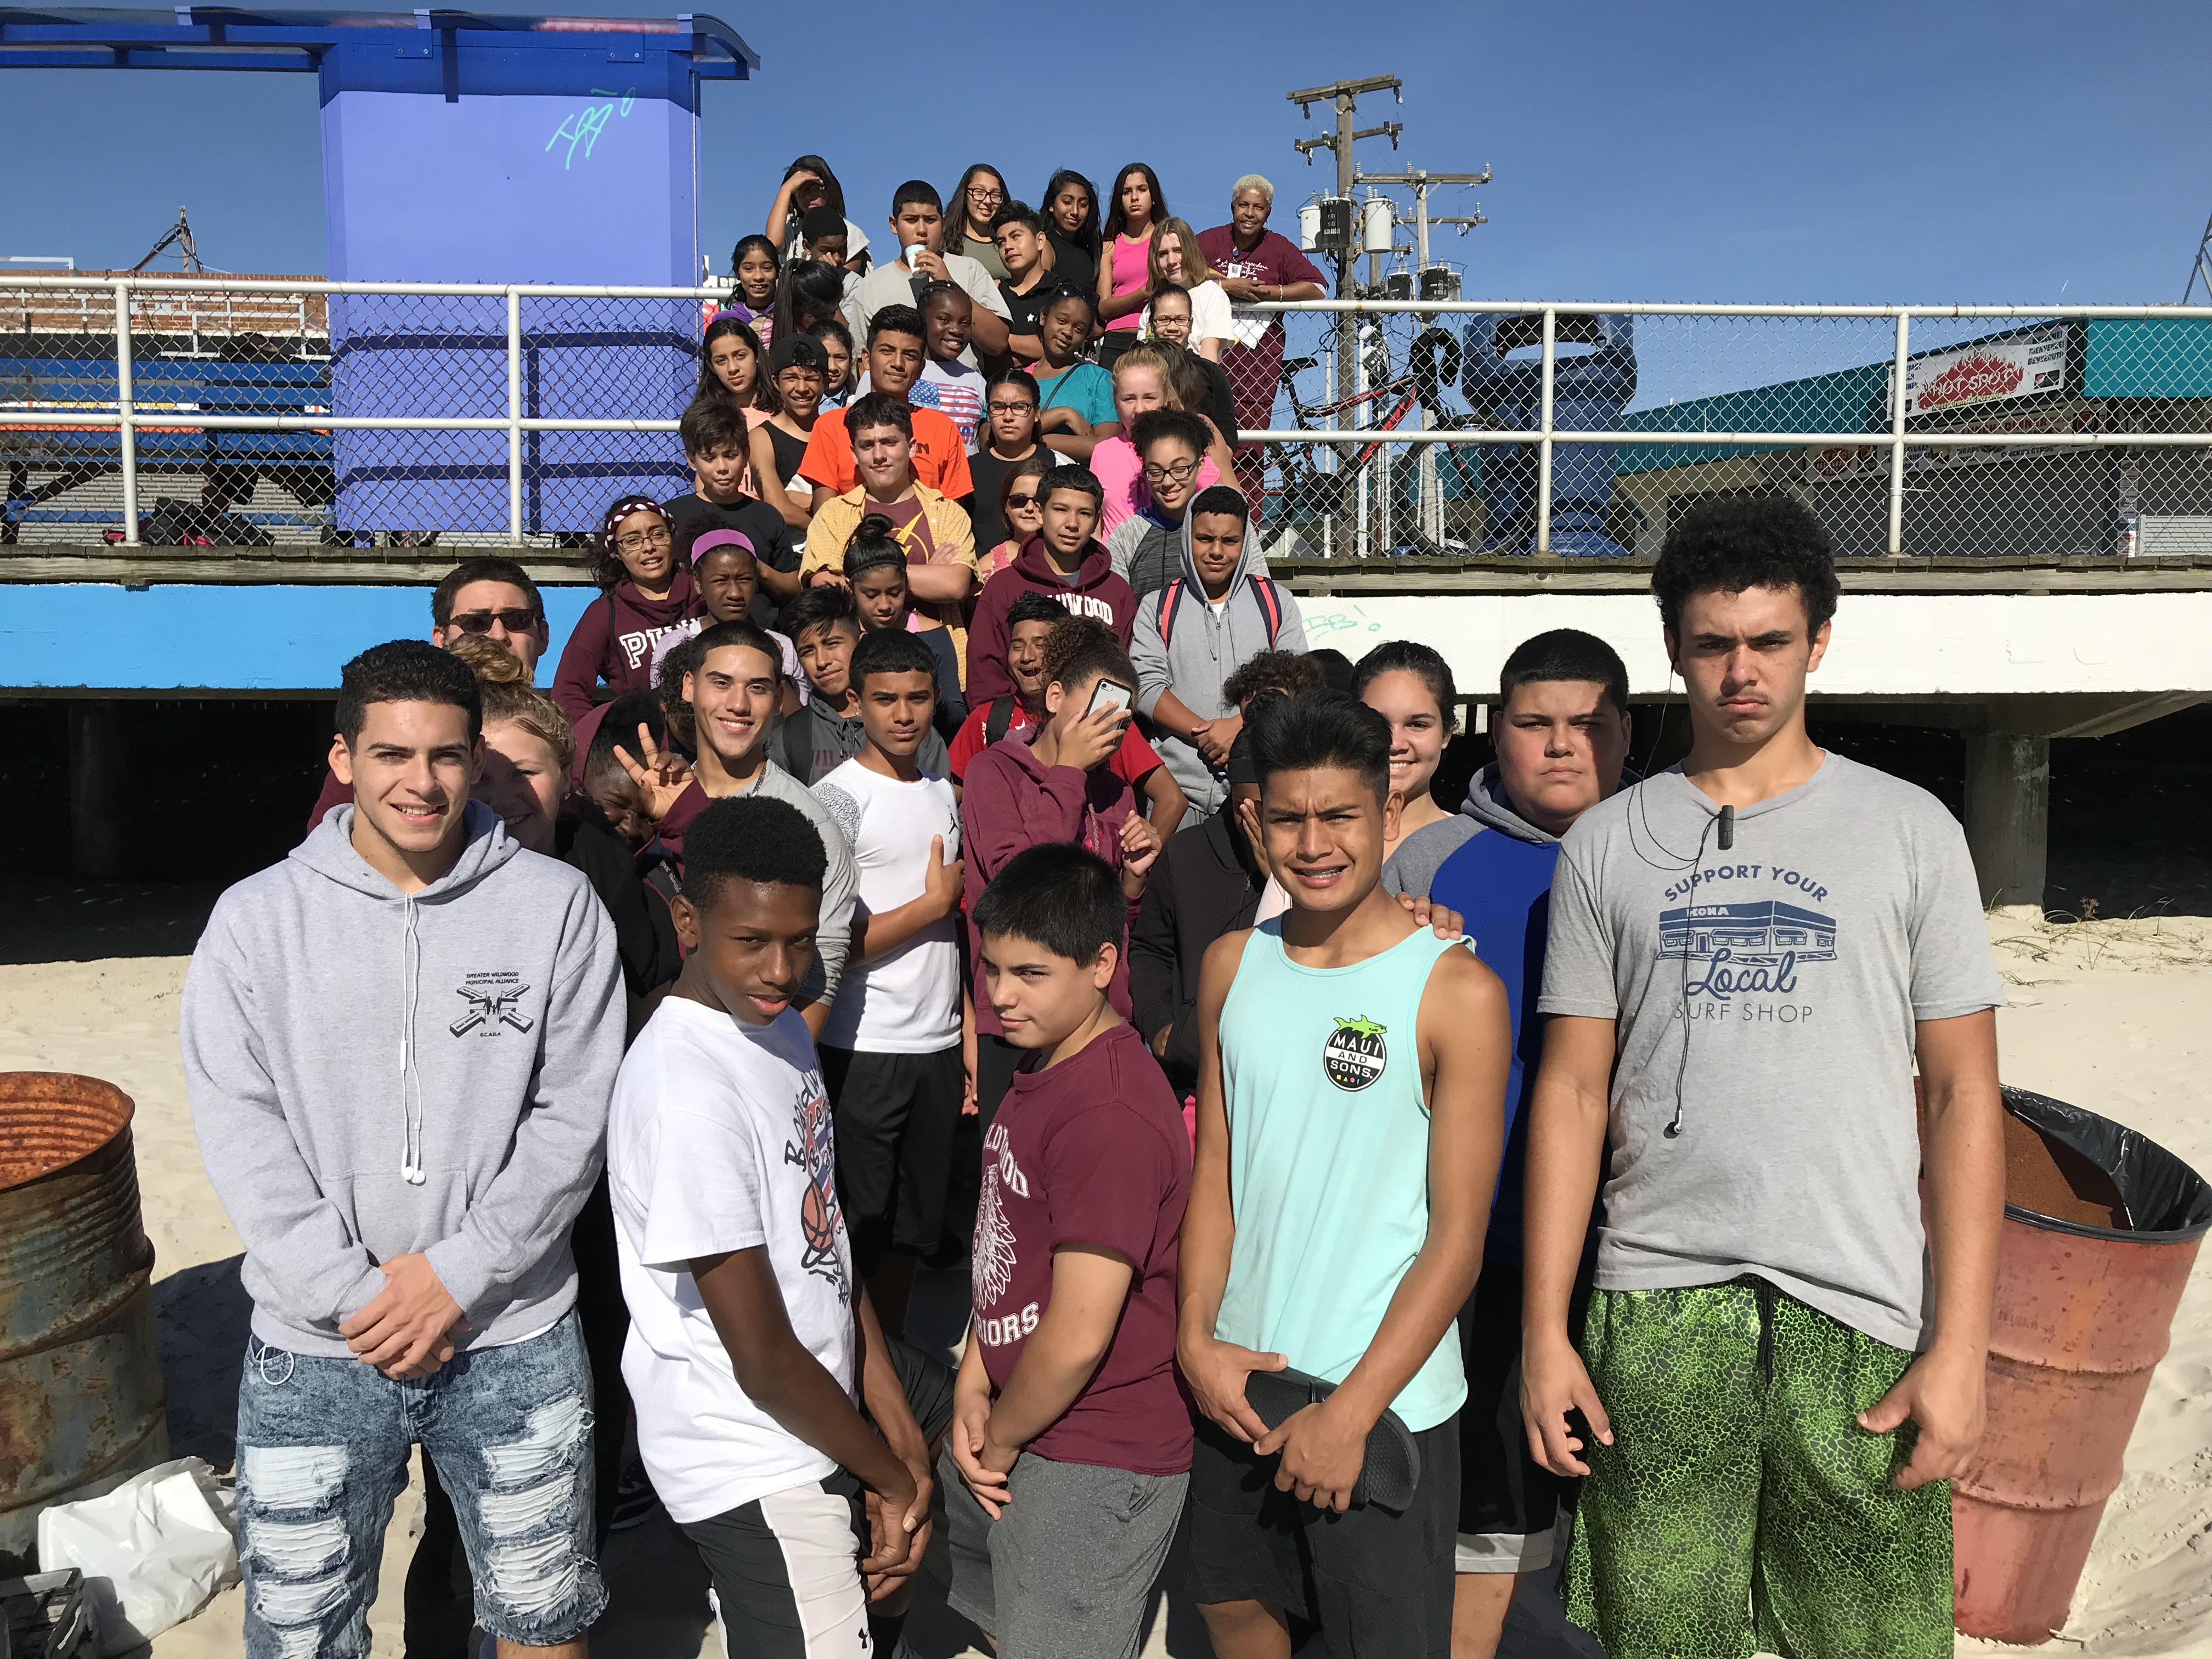 Wildwood Student Cleanup